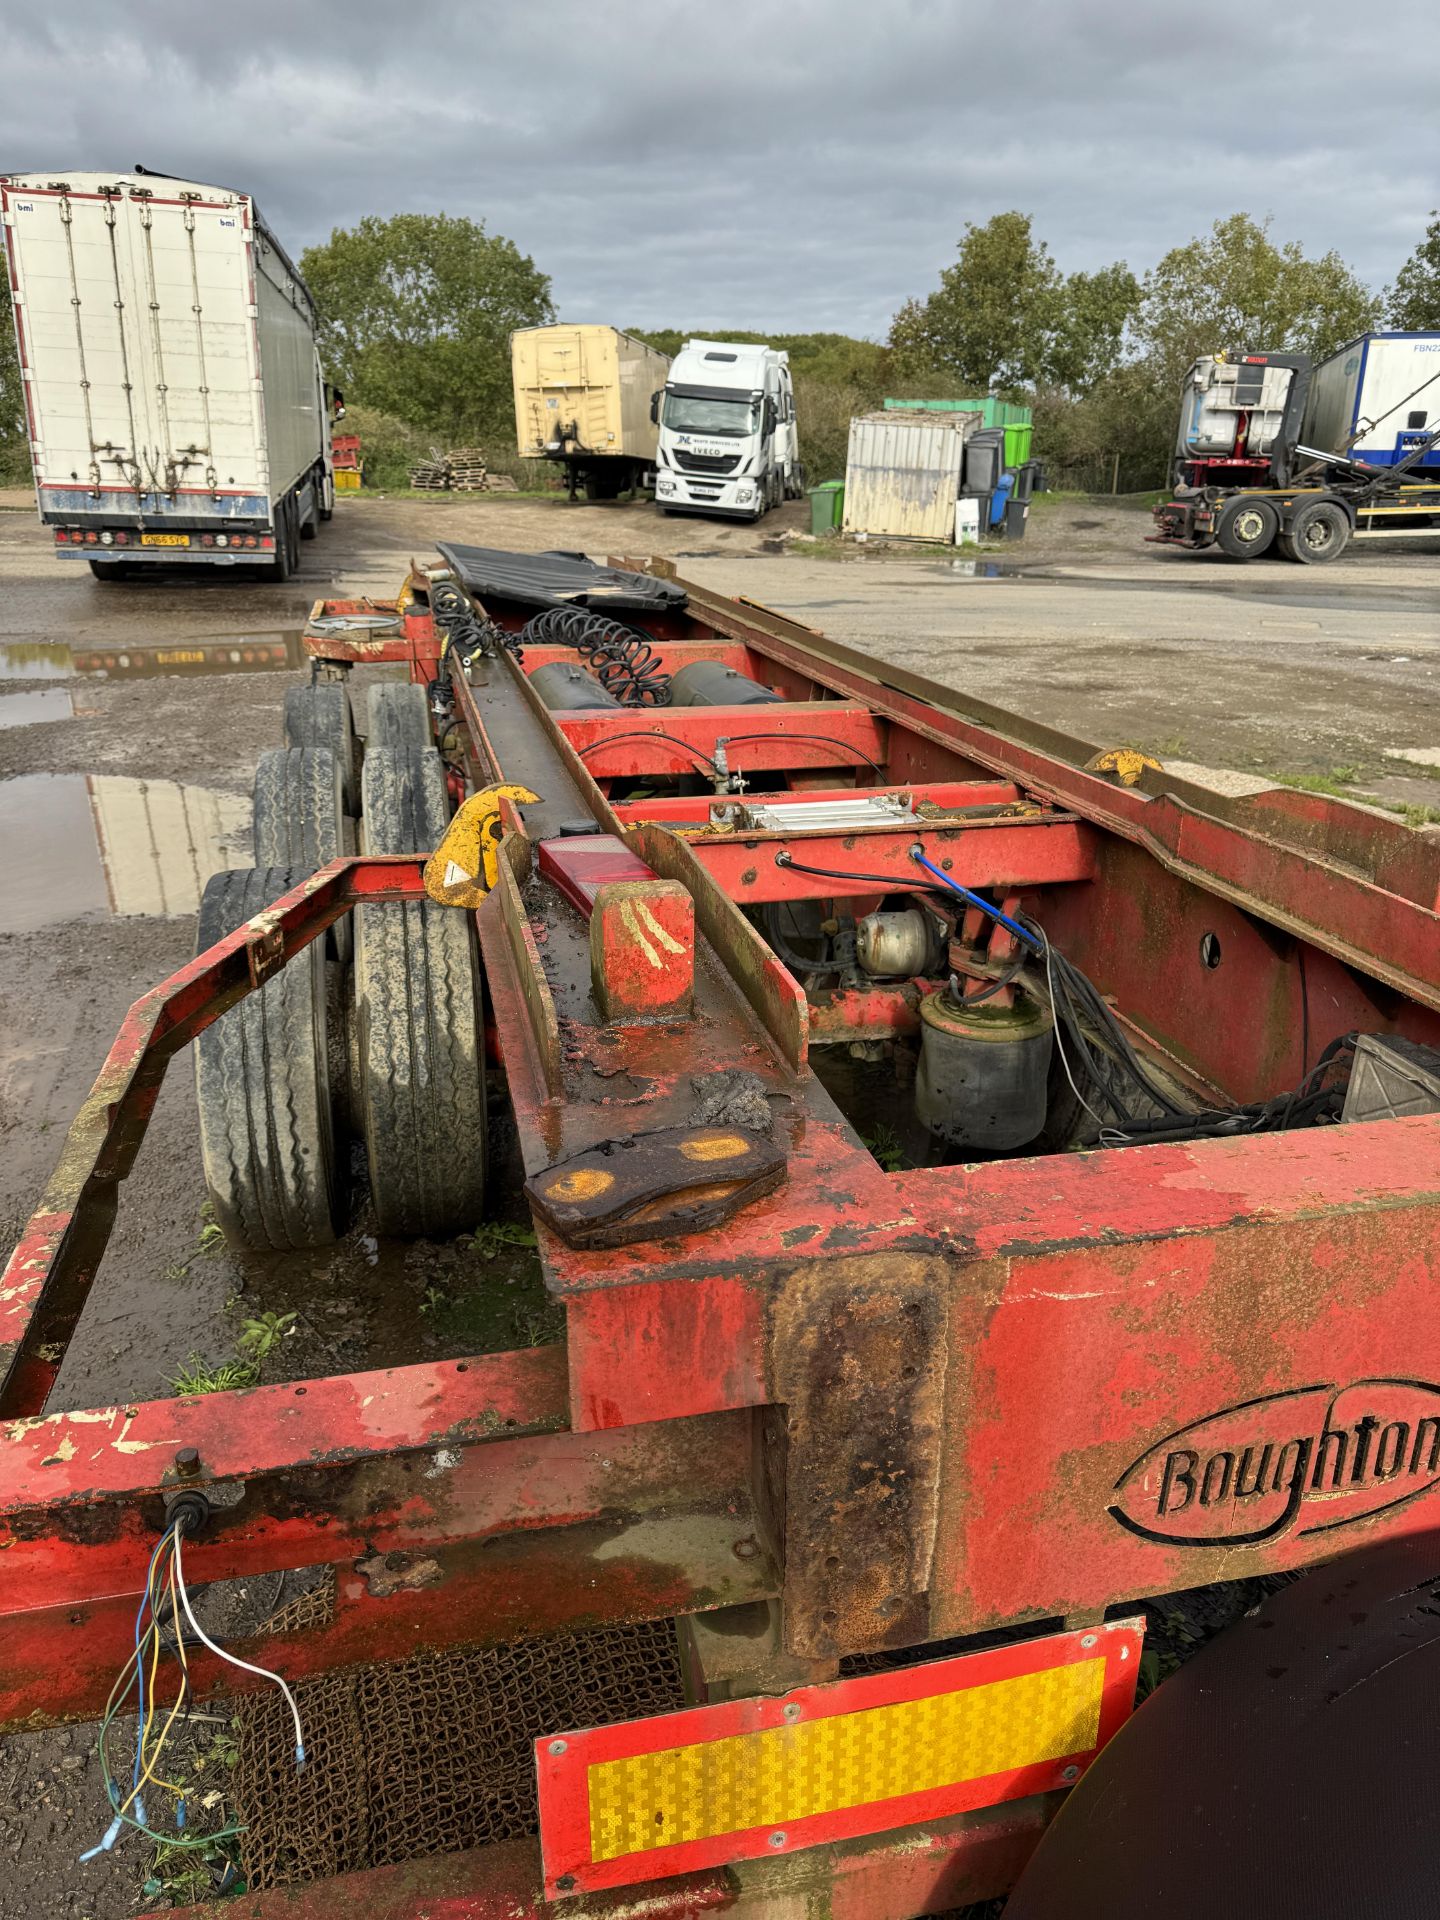 JNL 03 - The Boughton Tri - Axle Trailer, Sold for Spares - Image 4 of 12